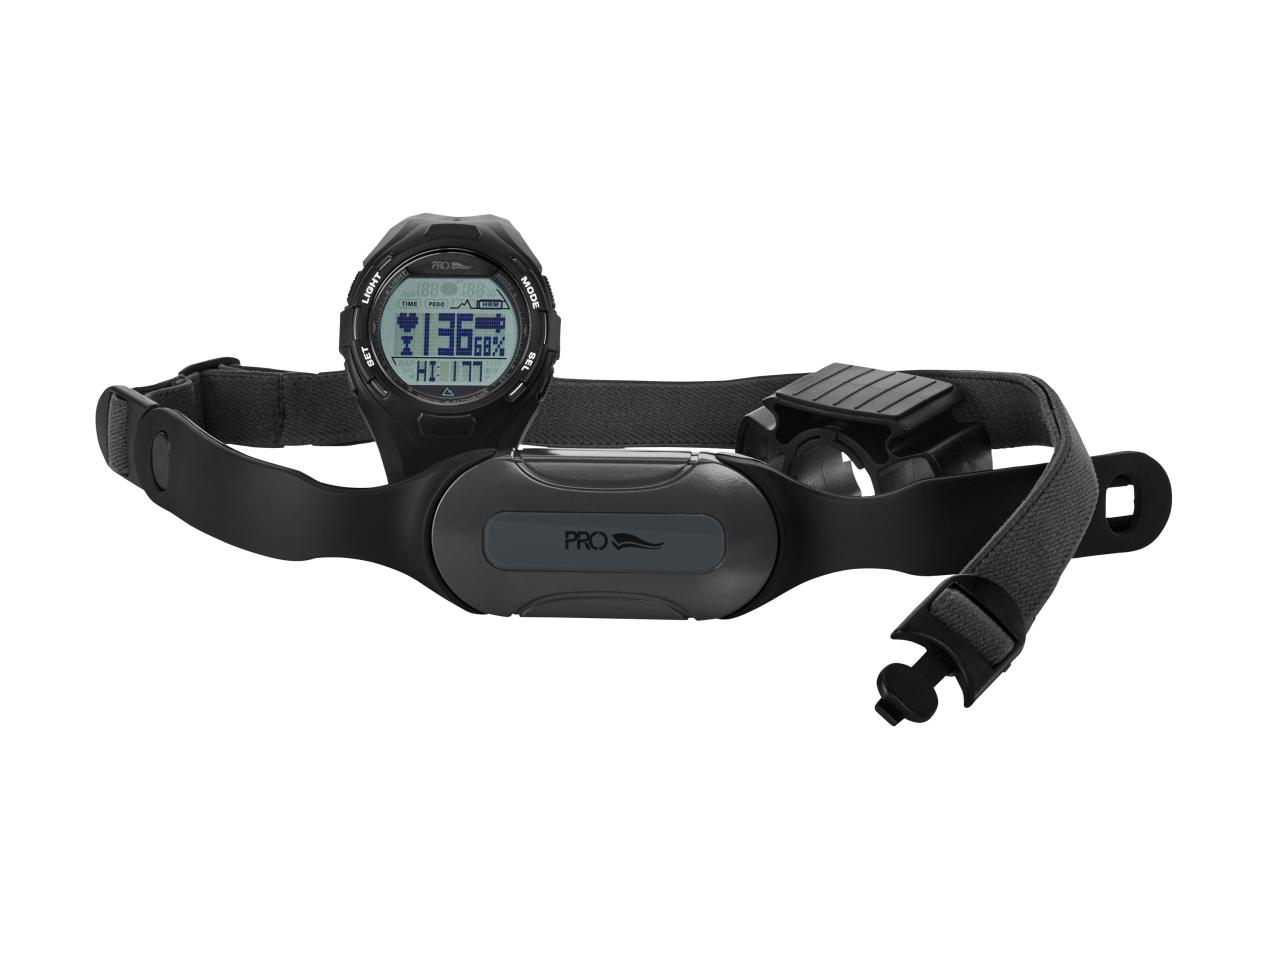 Heart Rate Monitor, Altimeter and Step Counter